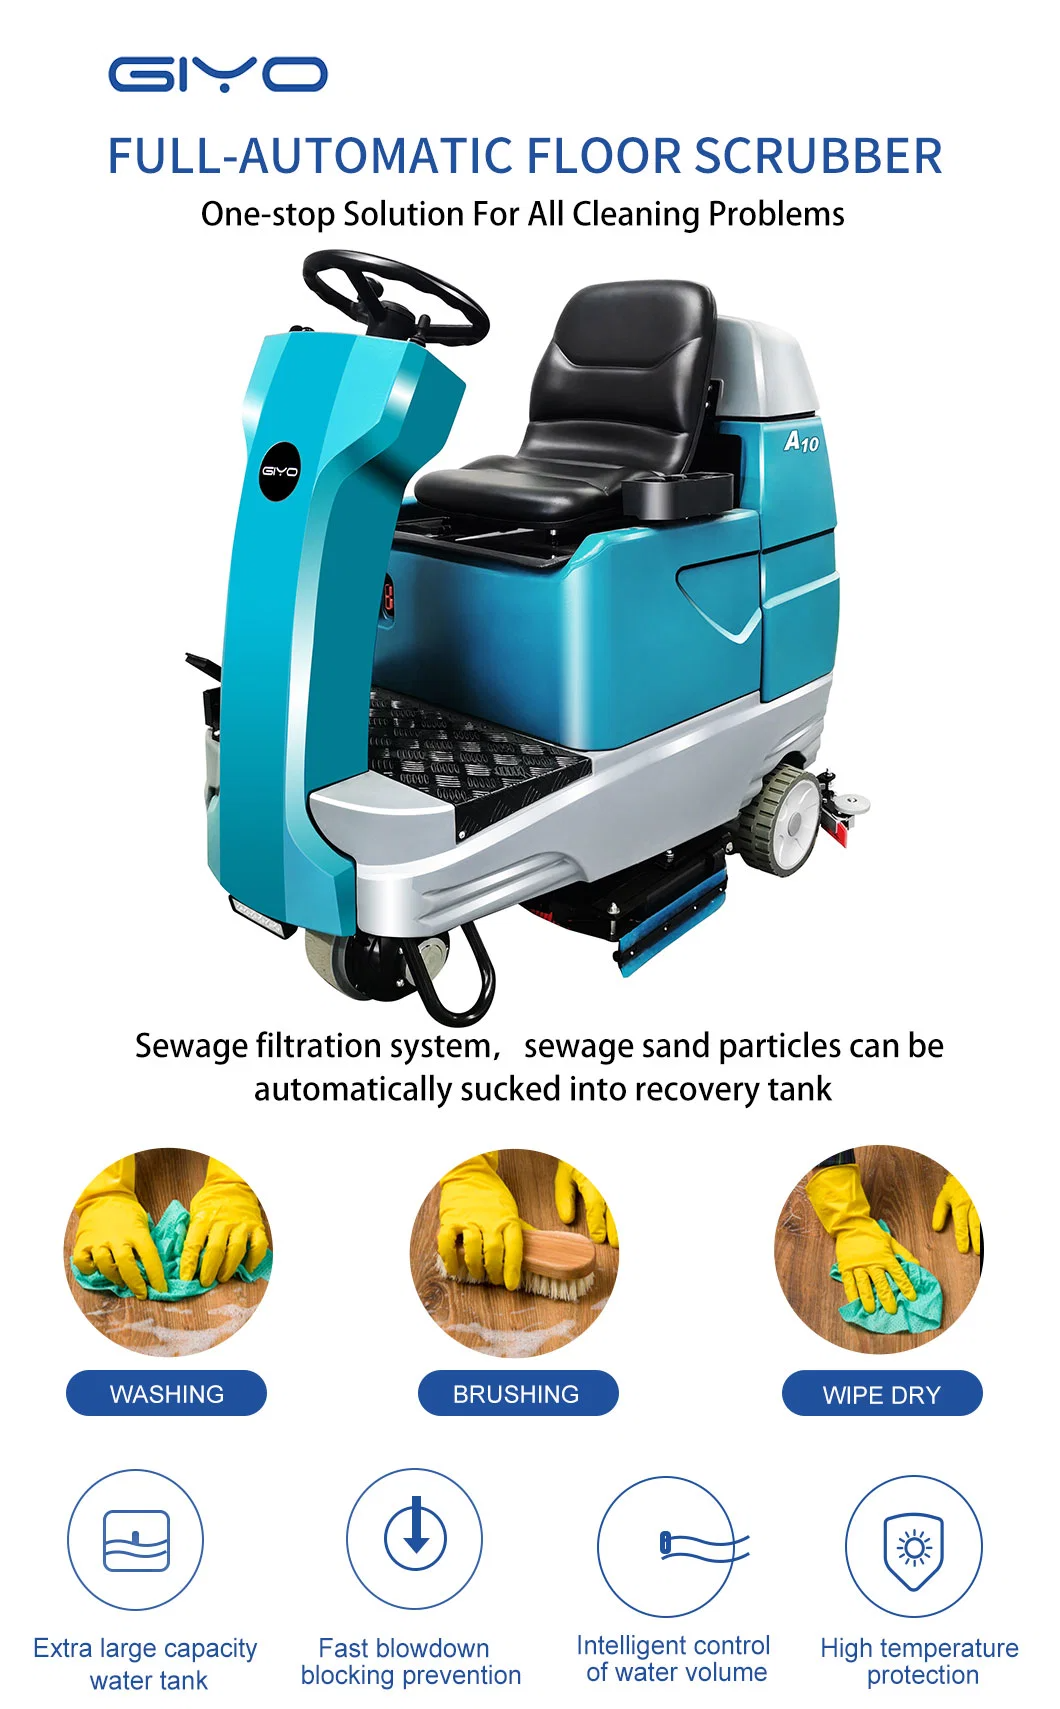 Industrial-Cleaning-Ride-on-Driving-Commercial-Tile-Floor-Scrubber-Machine (6)